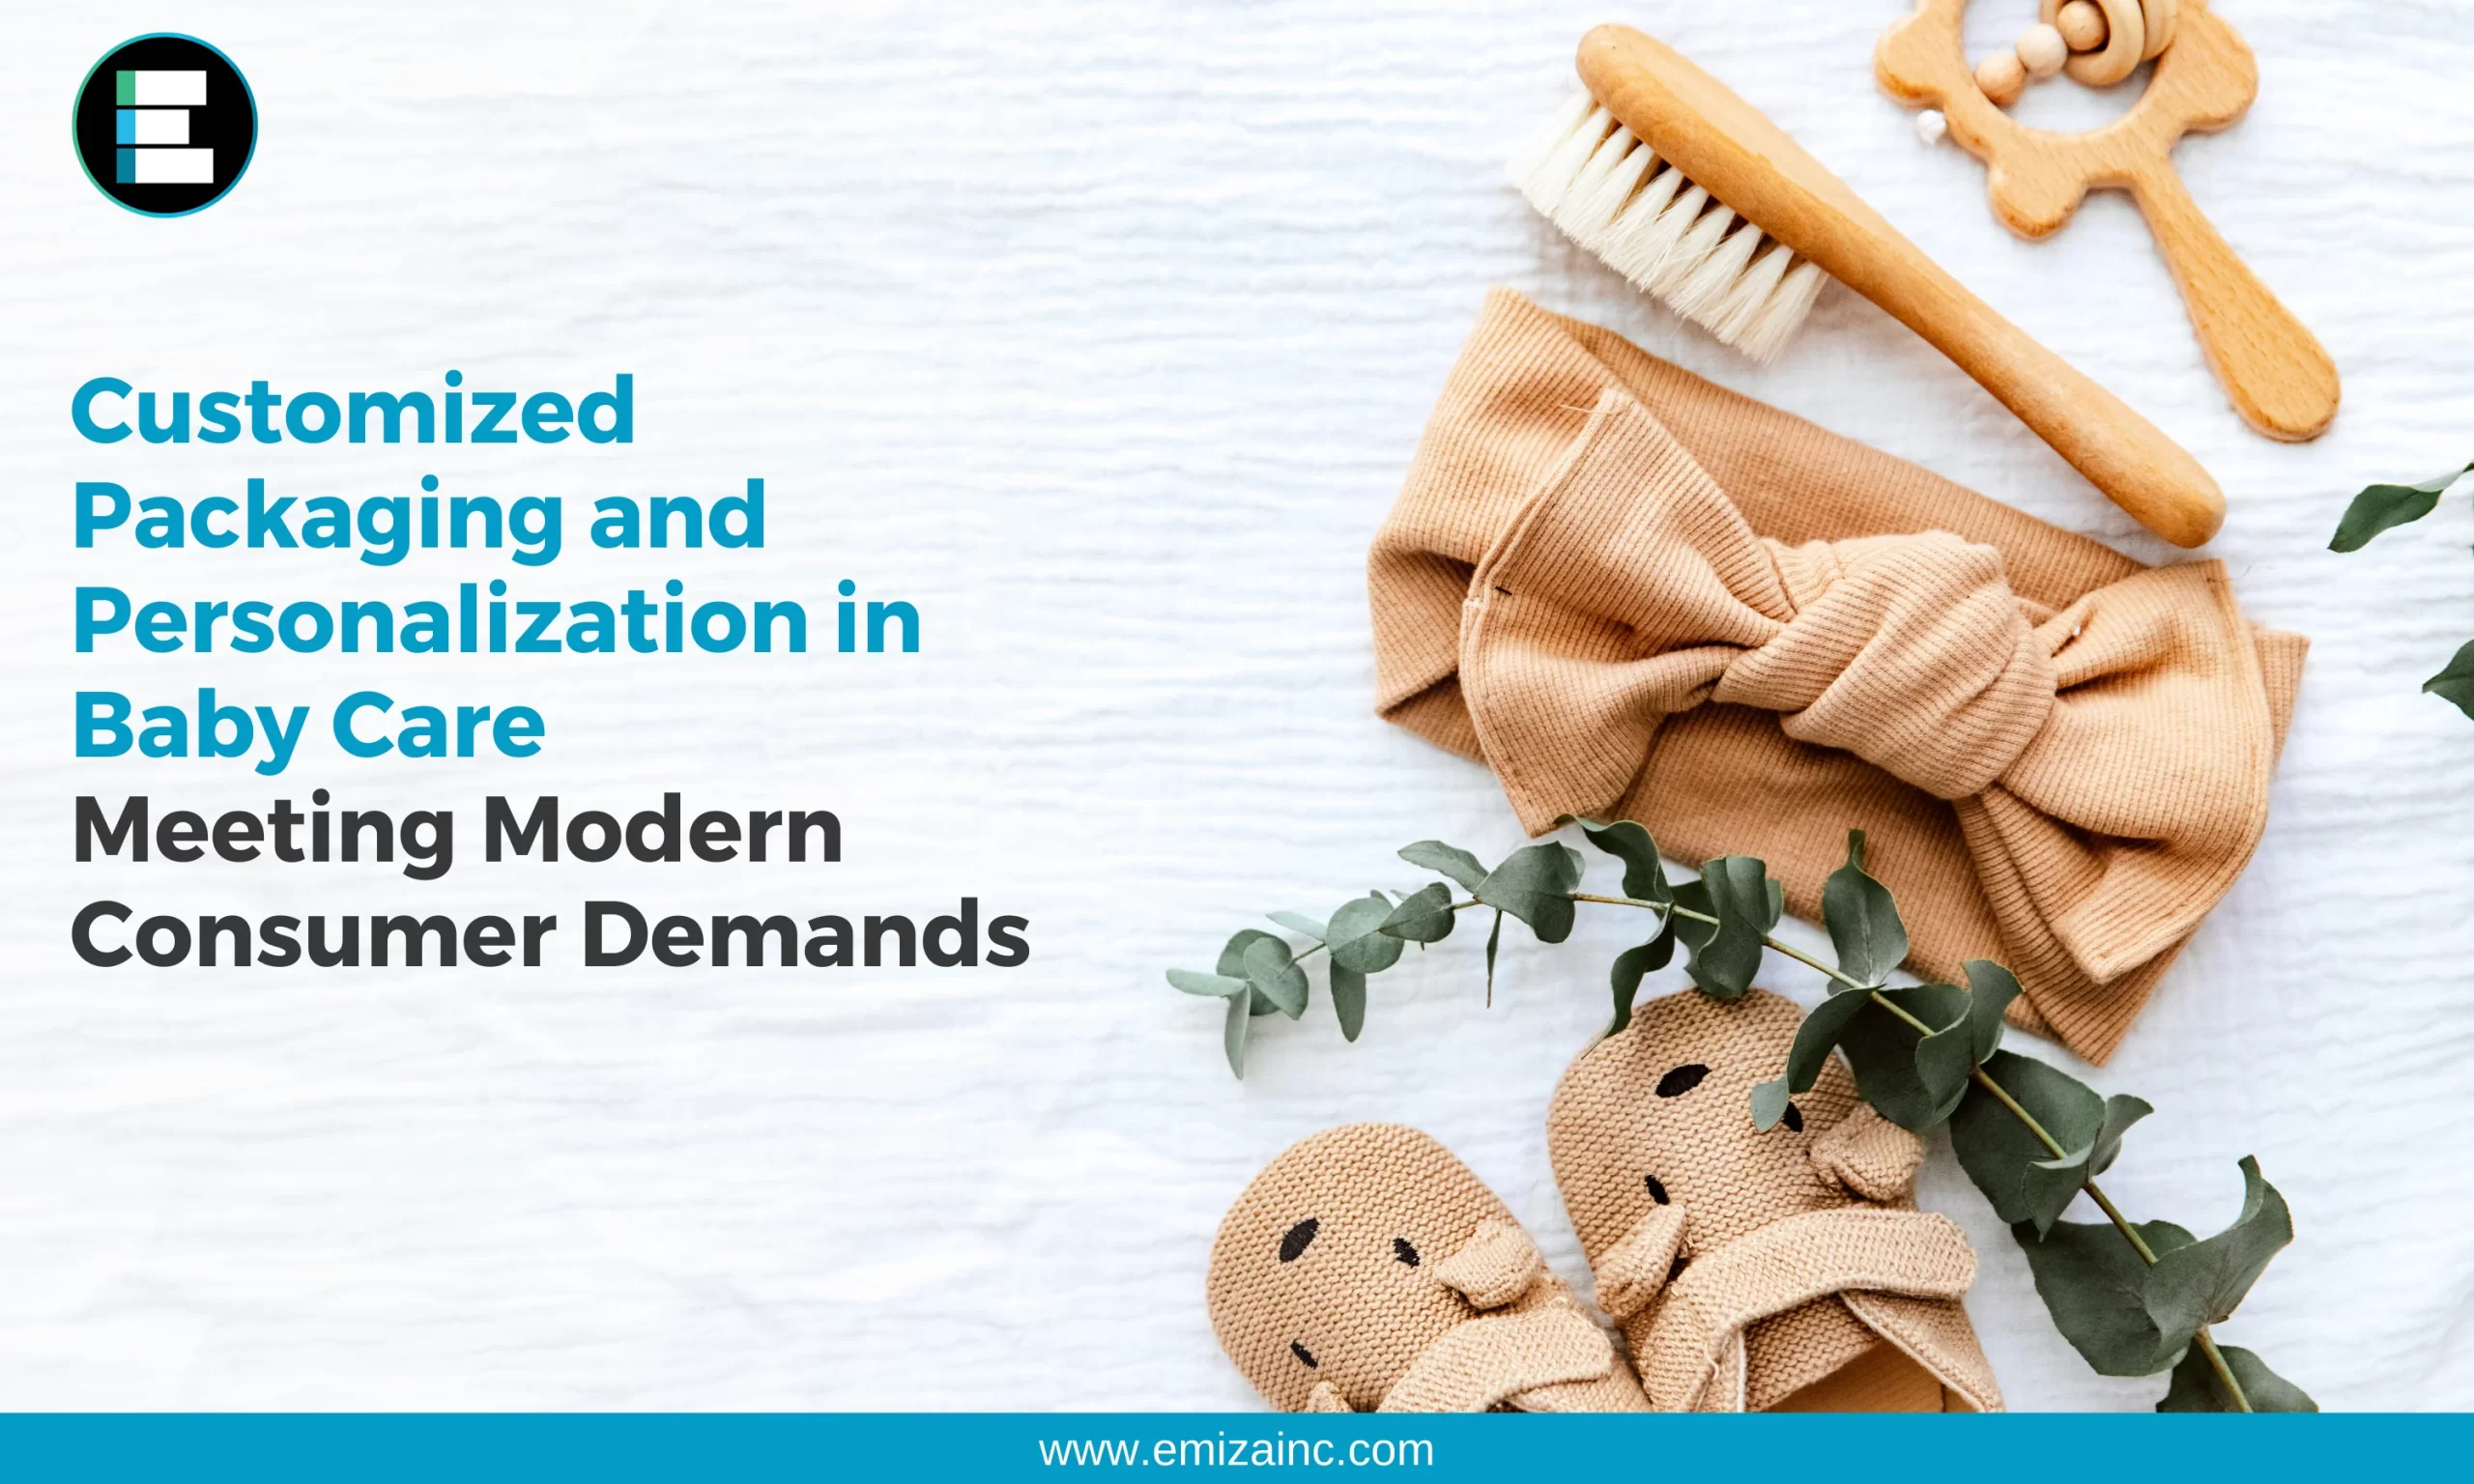 Customized Packaging and Personalization in Baby Care: Meeting Modern Consumer Demands